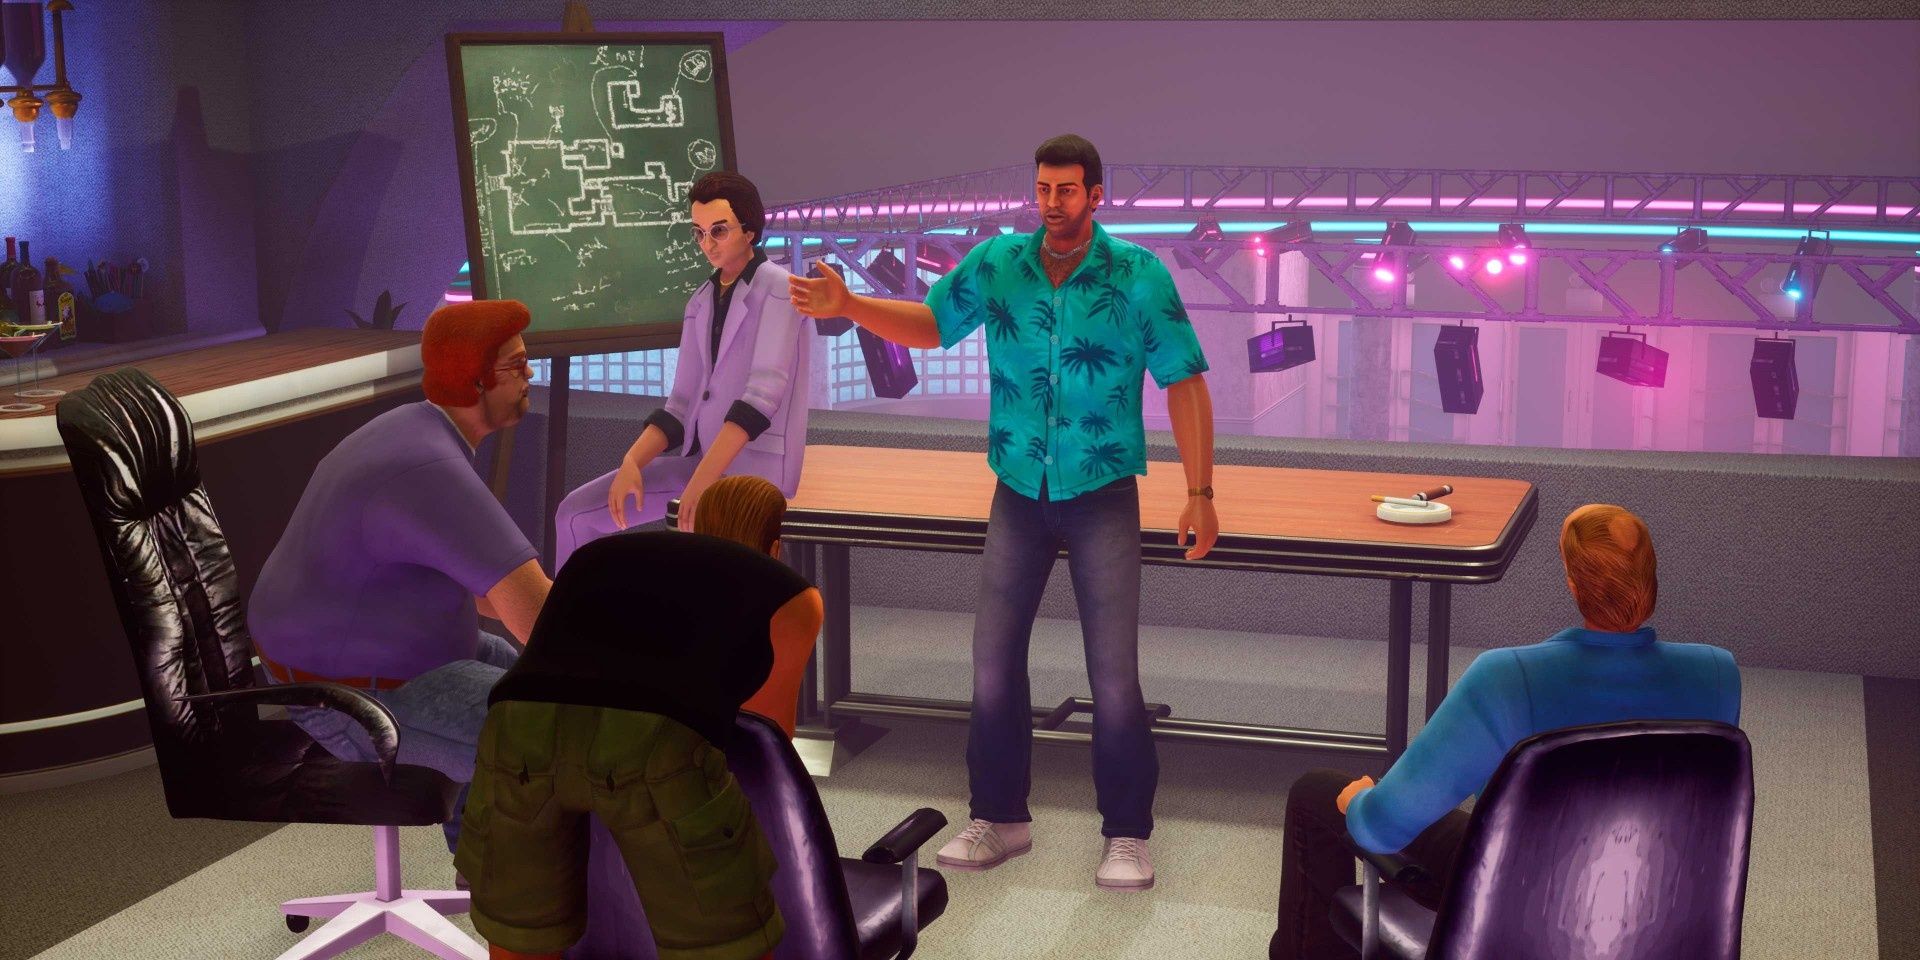 A screenshot showing Tommy Vercetti and the gang inside The Malibu Club in Grand Theft Auto: Vice City - The Definitive Edition